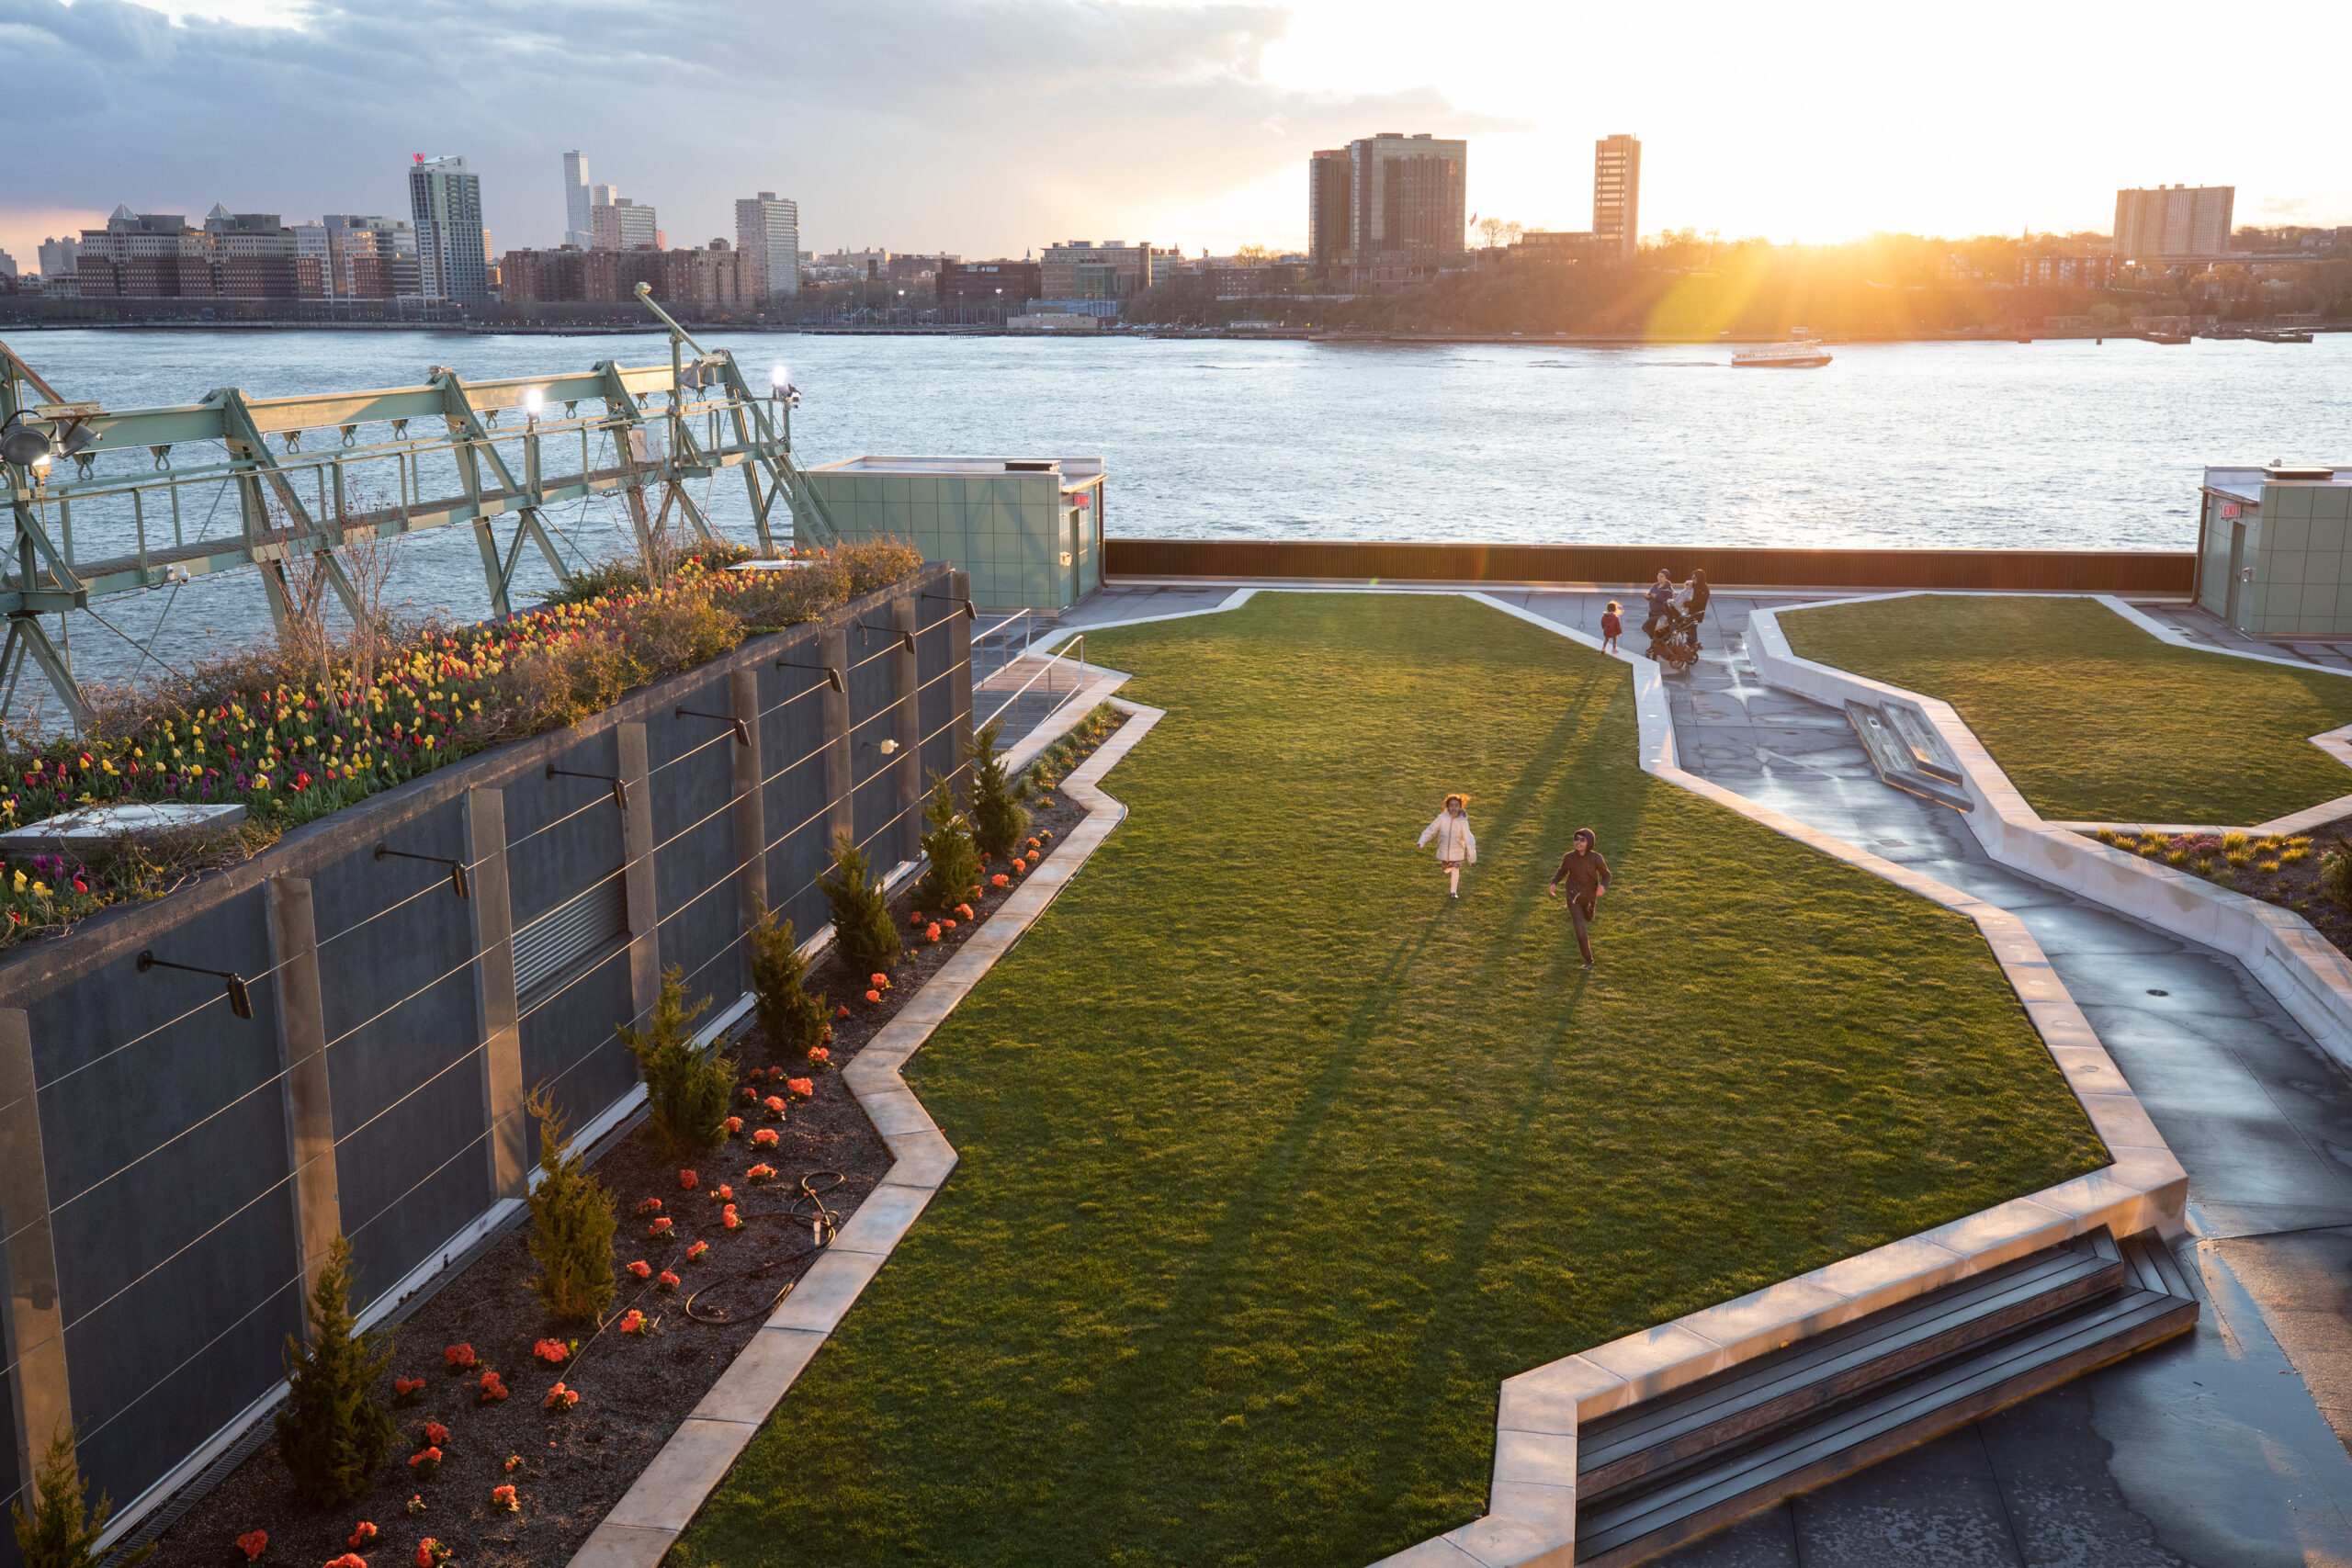 Two children playing on a lawn on the Pier 57 rooftop, while a group walks along a walkway between lawns.